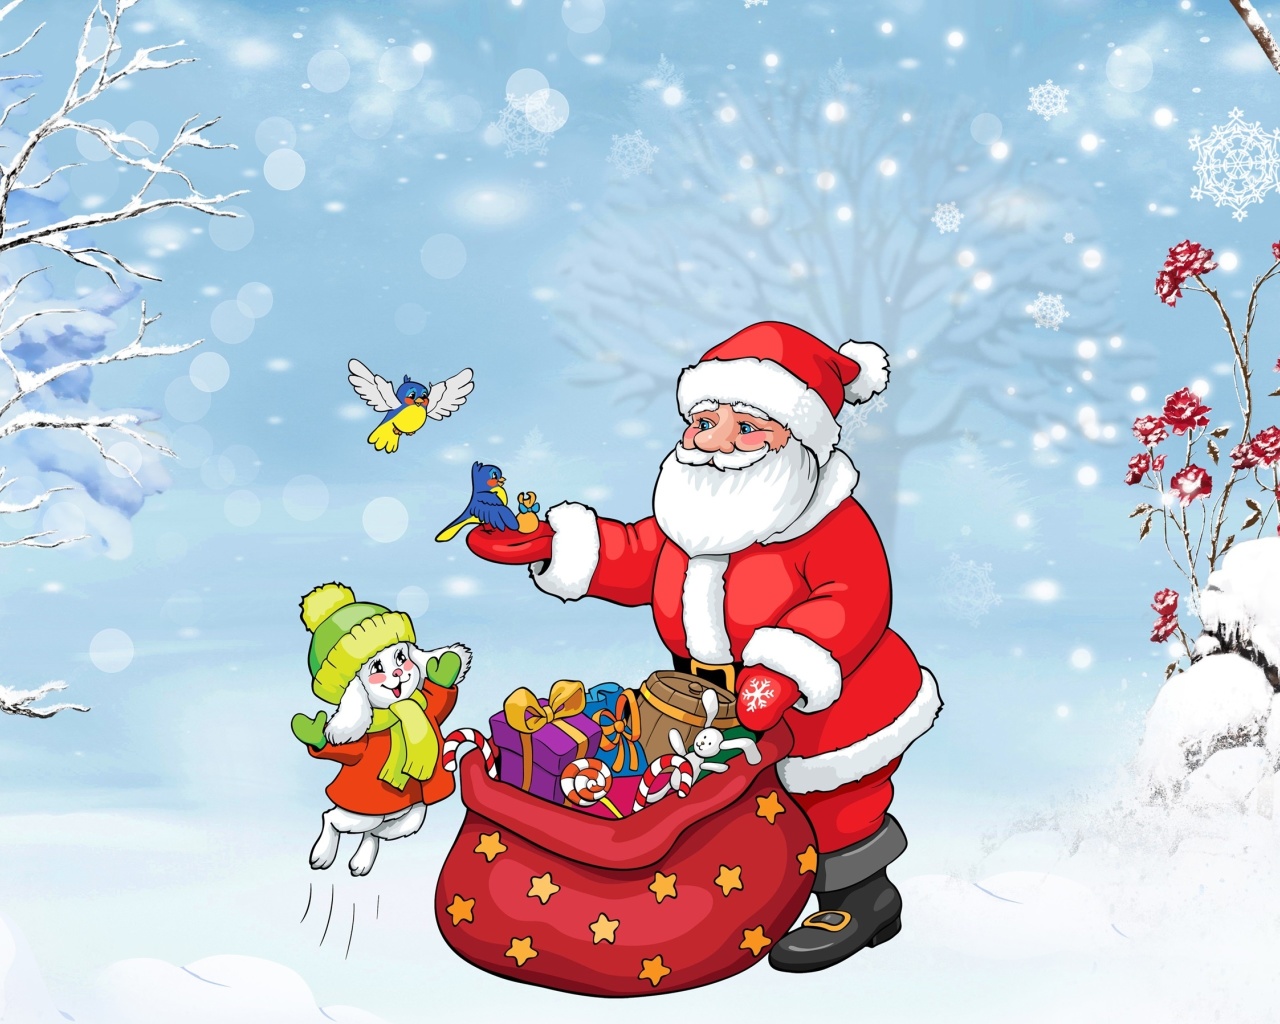 Santa Claus And The Christmas Adventure wallpaper 1280x1024